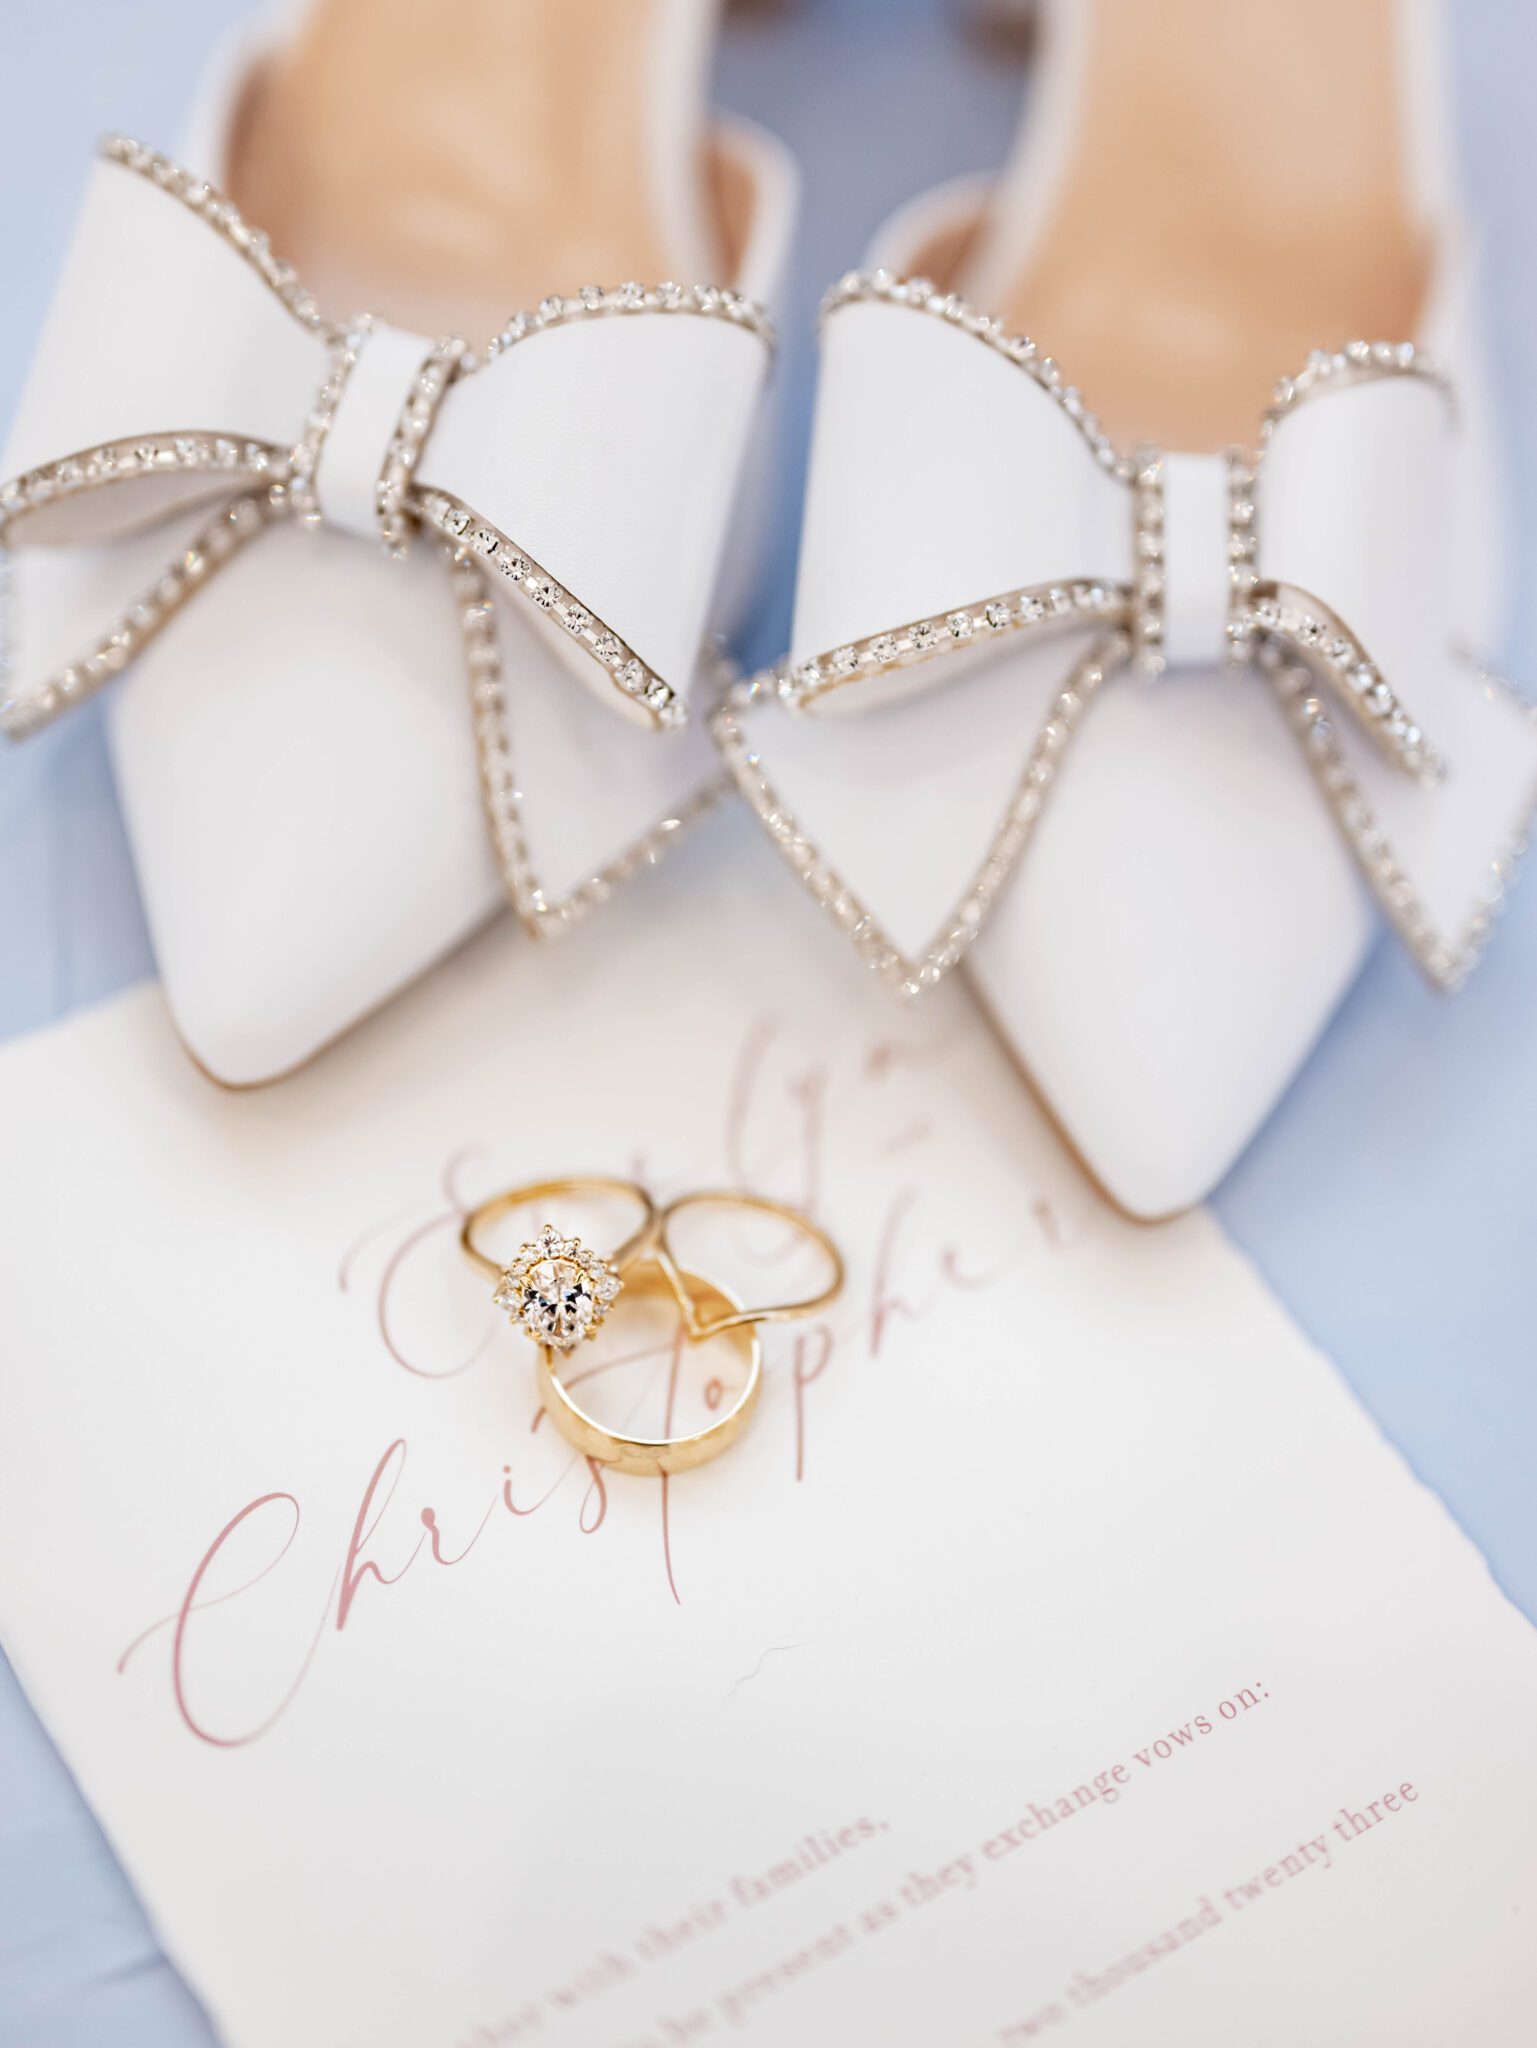 Elegant white pointy-toe bridal heels featuring a large bow adorned with sparkling crystals, wedding invitation flat-lay inspiration with bridal shoes and rings